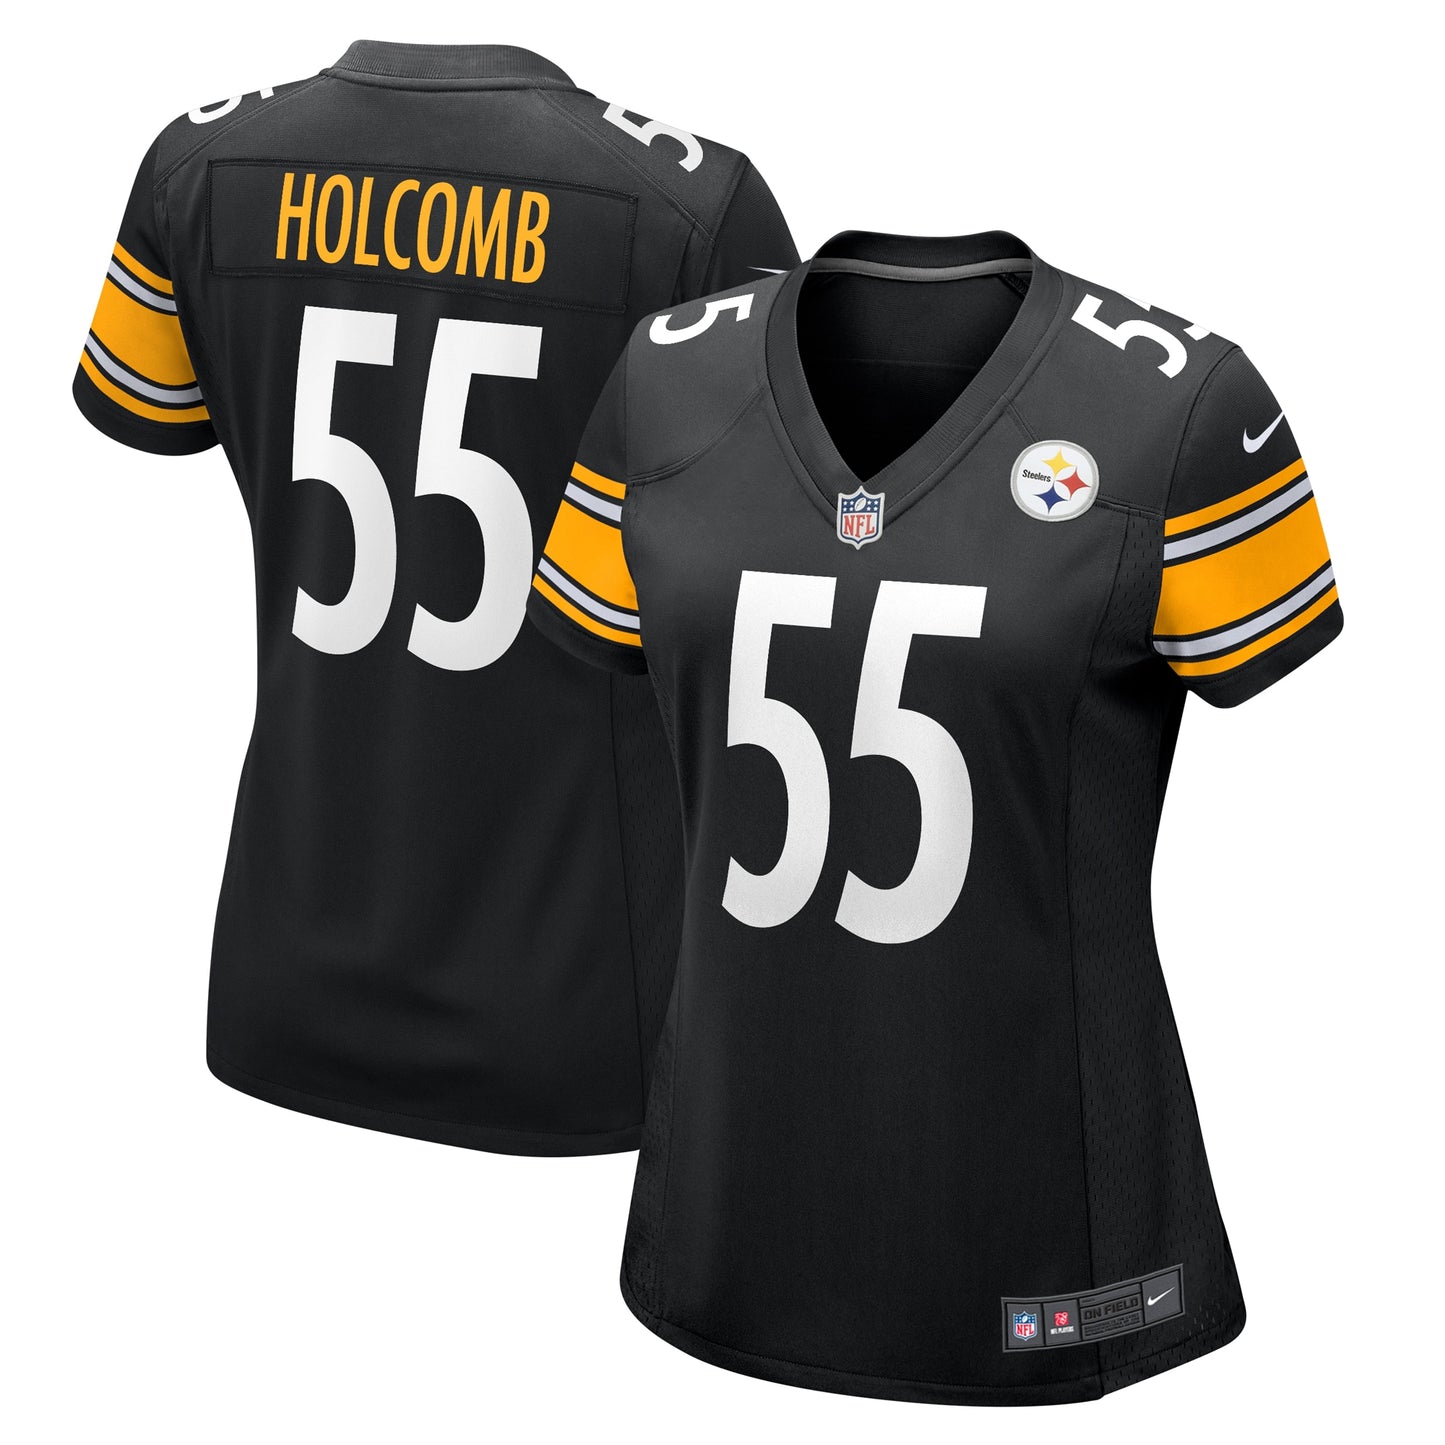 Cole Holcomb Pittsburgh Steelers Nike Women's Game Player Jersey - Black